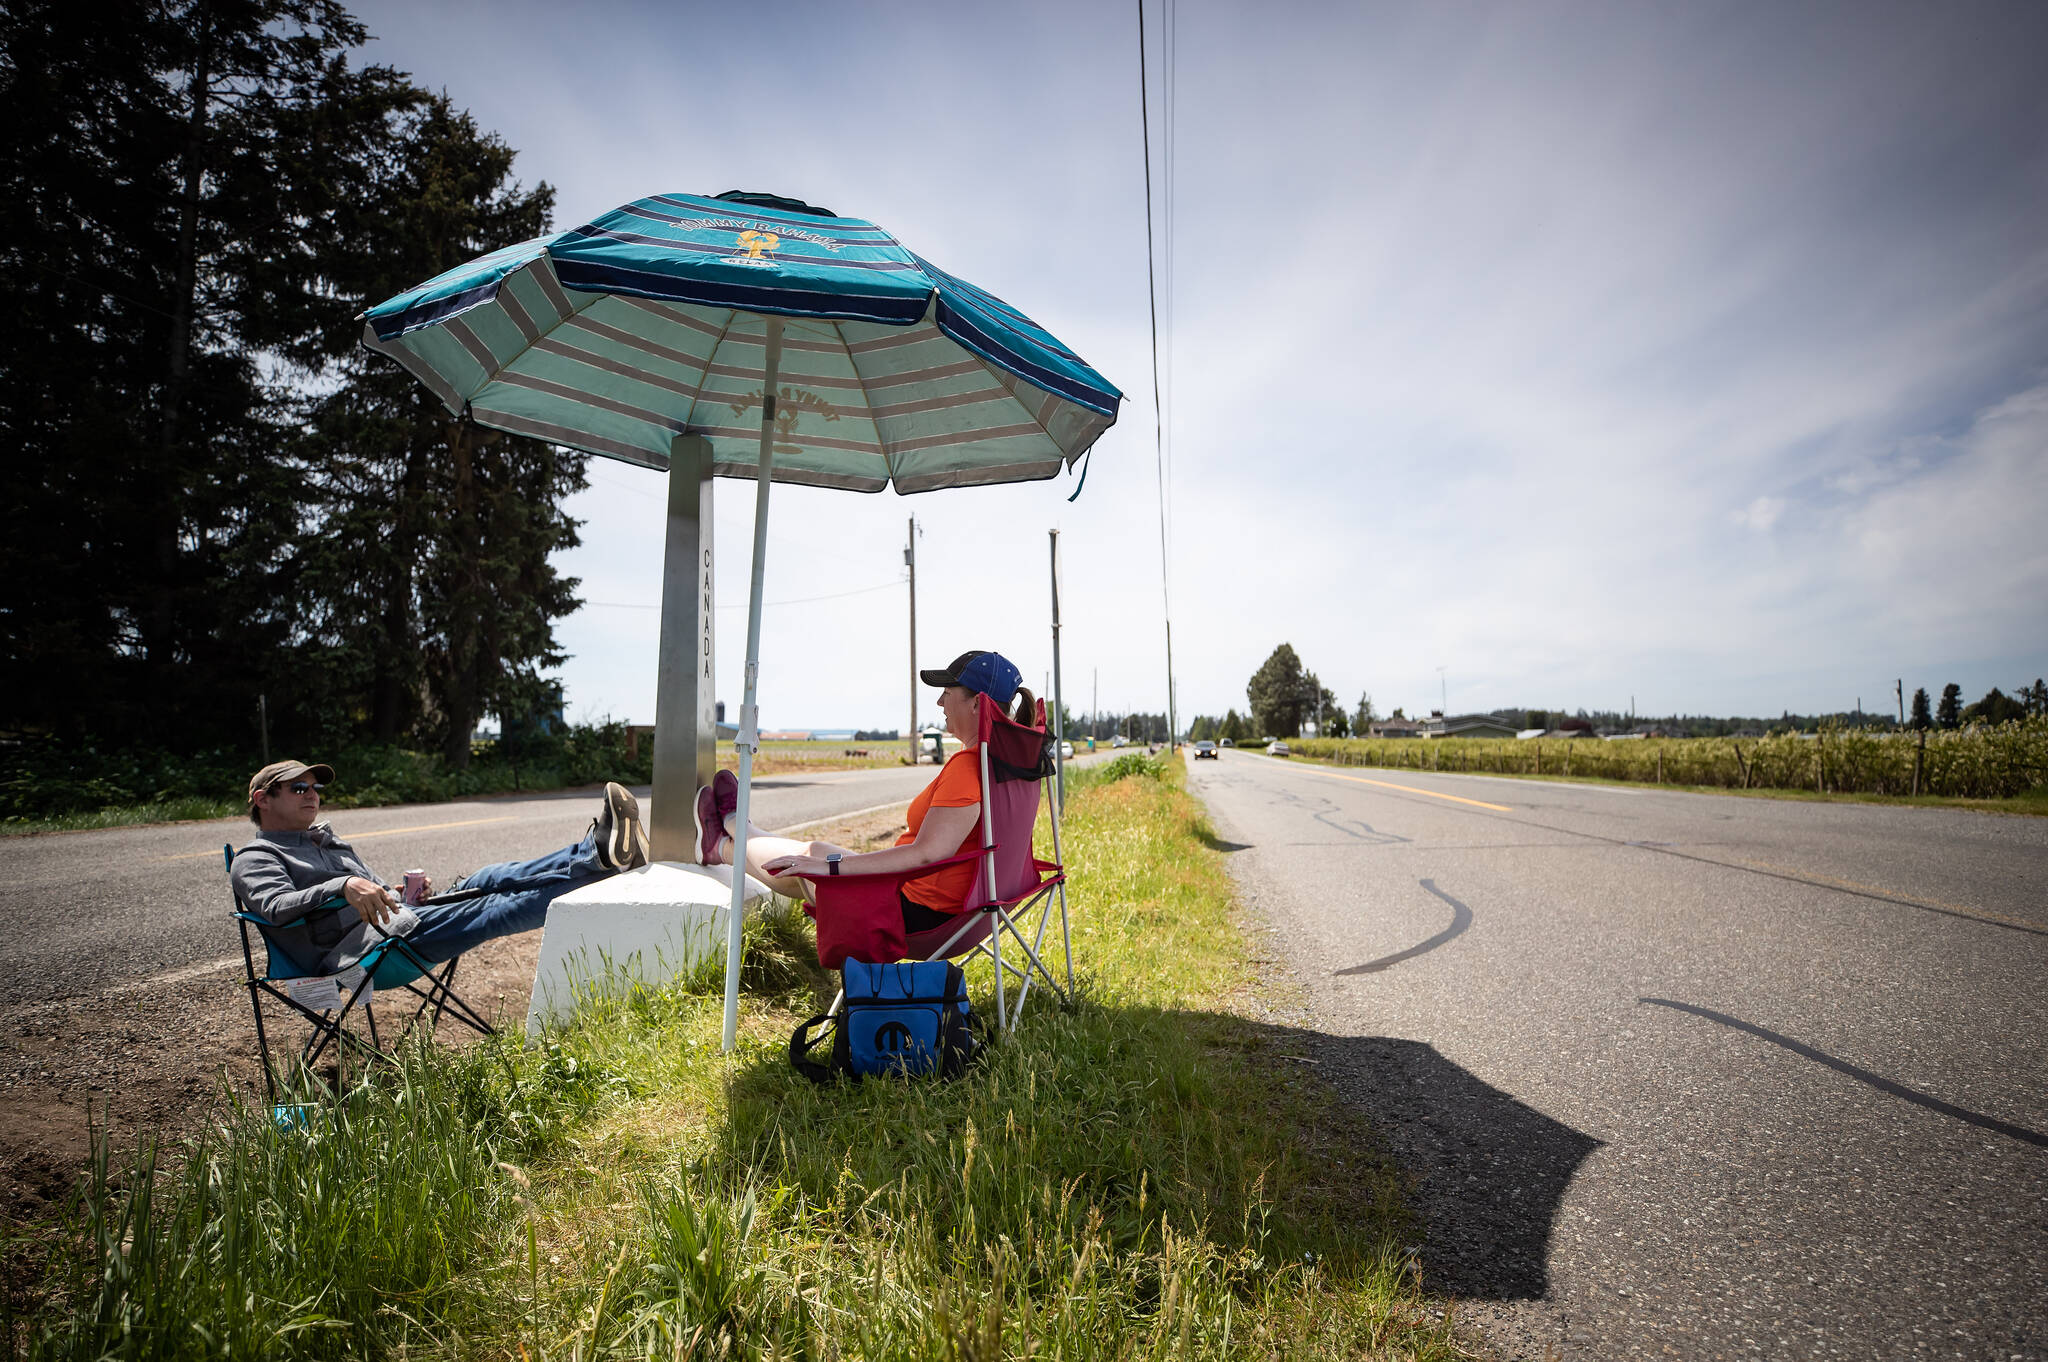 Engaged couple Rob Sensel, left, of Mount Vernon, Wash., and Kathryn Bell Lewis, of Richmond, B.C., spend time together separated by a ditch along the Canada-U.S. border, in Abbotsford, B.C., on Sunday, May 10, 2020. The closure of the Canada-U.S. border to non-essential travel has been extended another month, the U.S. announced Sept. 20. THE CANADIAN PRESS/Darryl Dyck